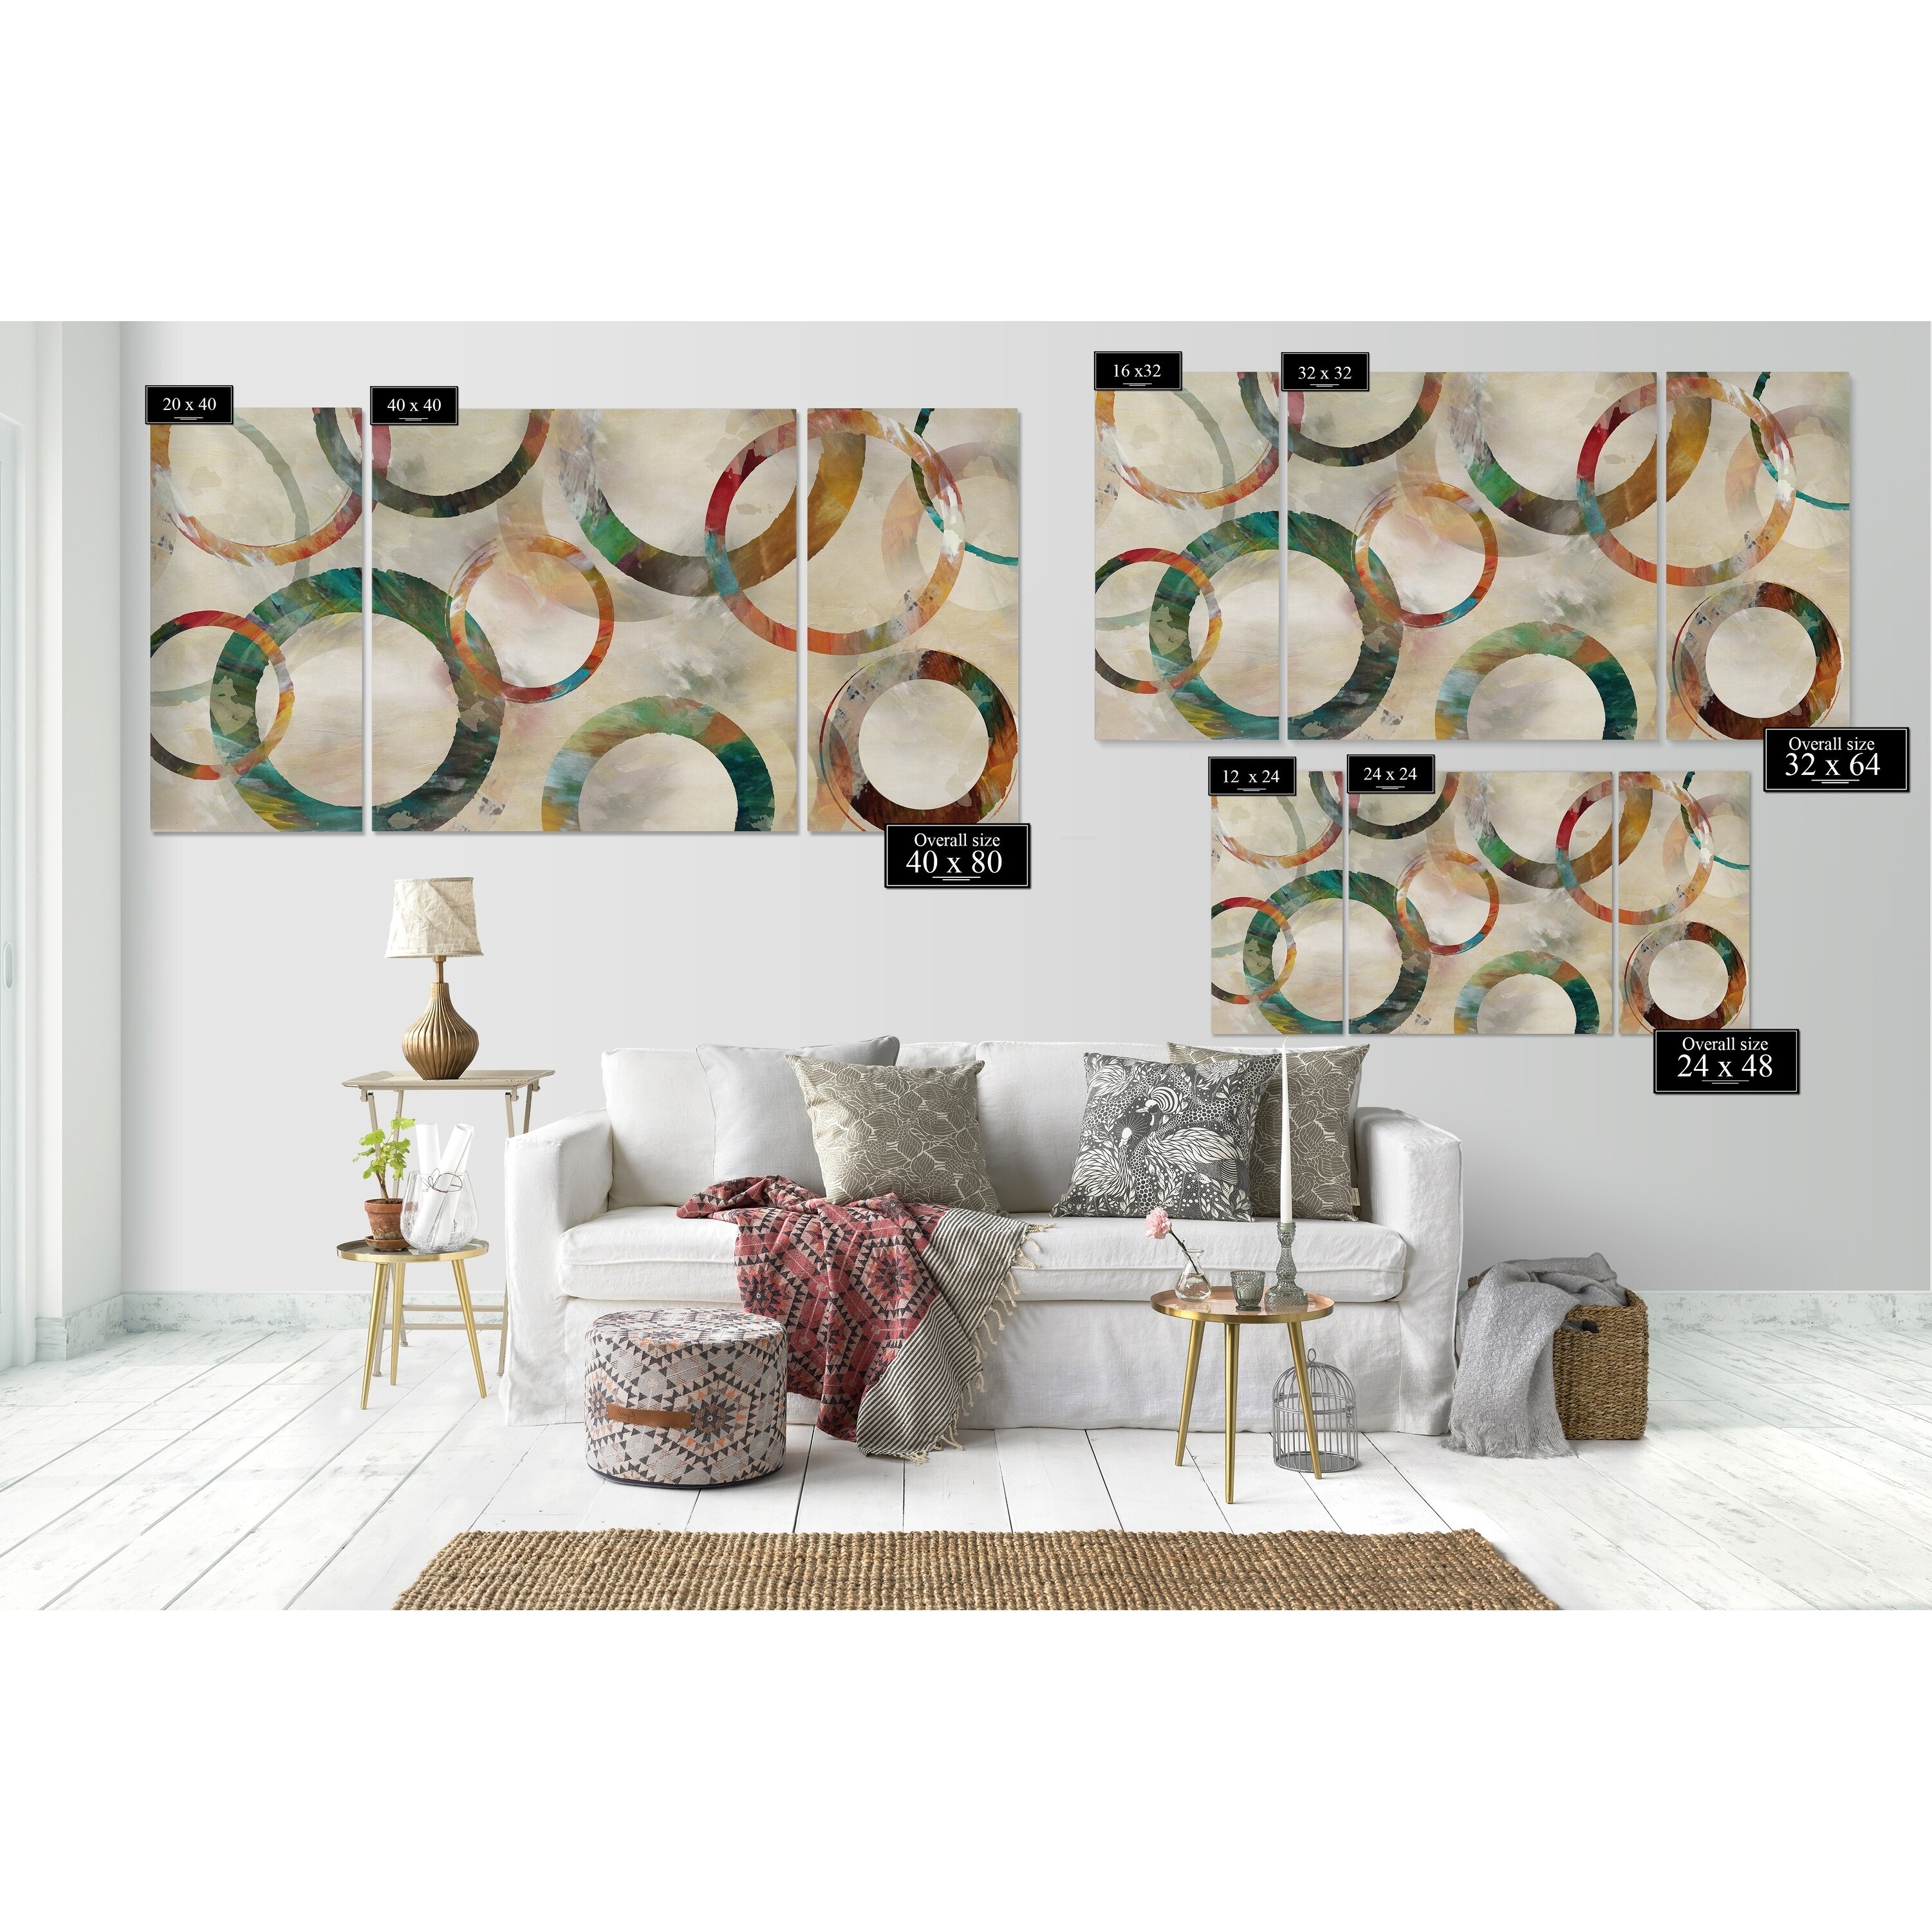 'Rings Galore' Canvas Wall Art